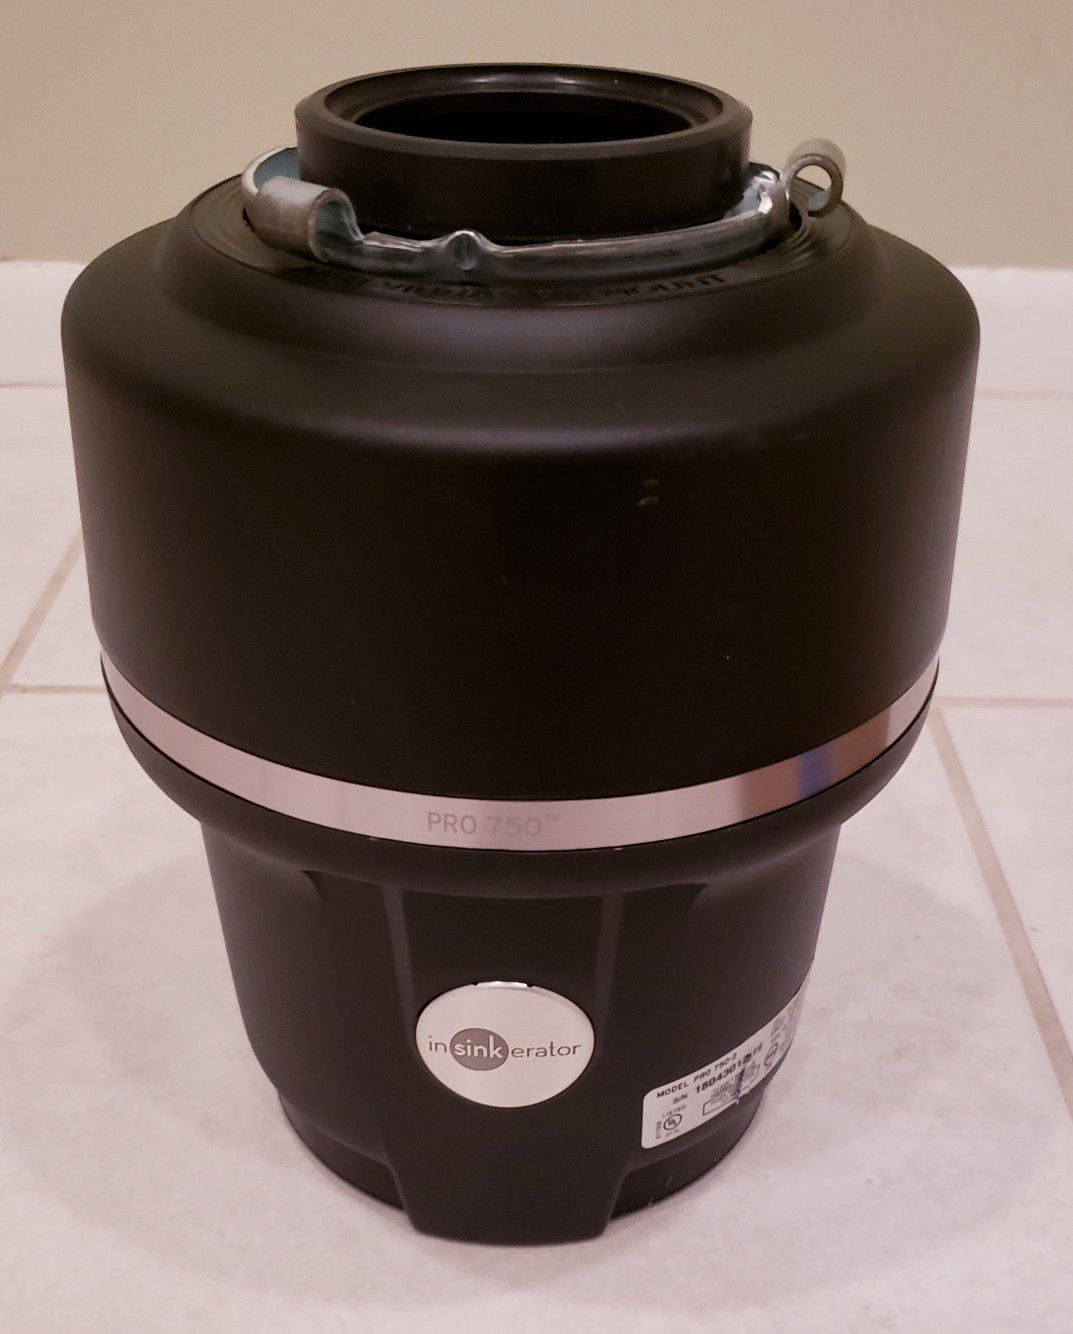 Food Waste / Garbage Disposal and Air Switch